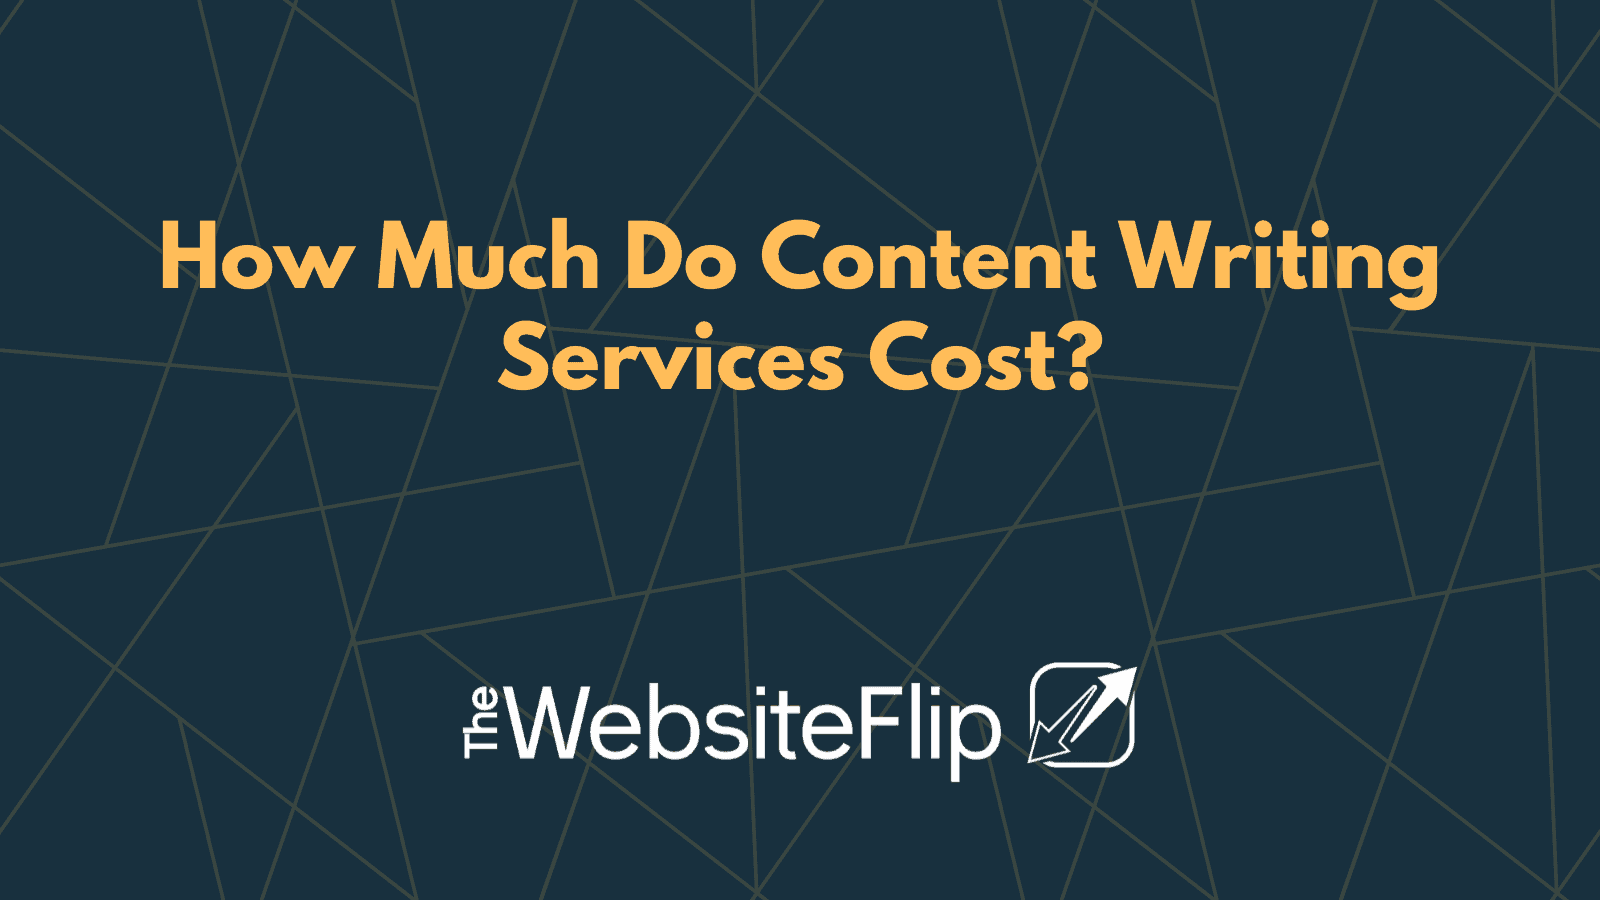 How Much Do Content Writing Services Cost